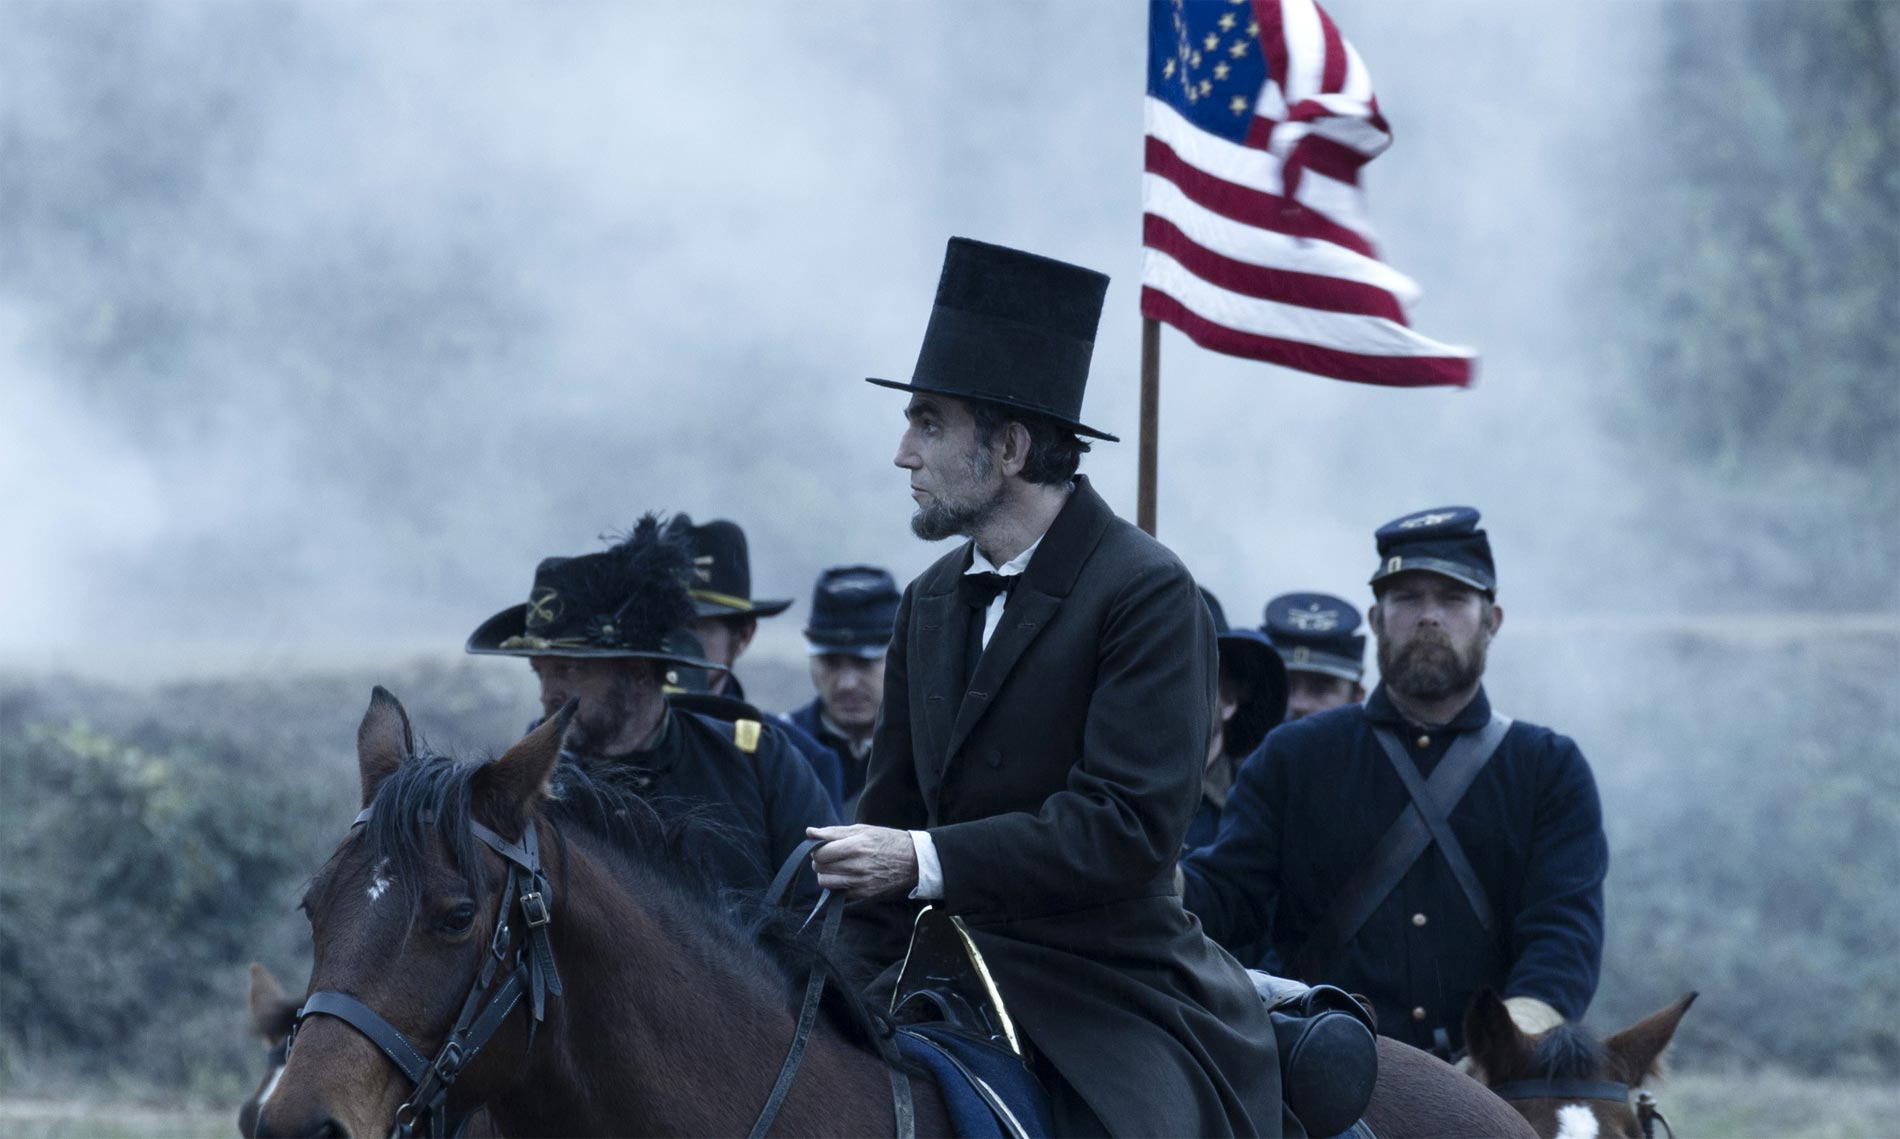 15 Best American Civil War Movies of All Time